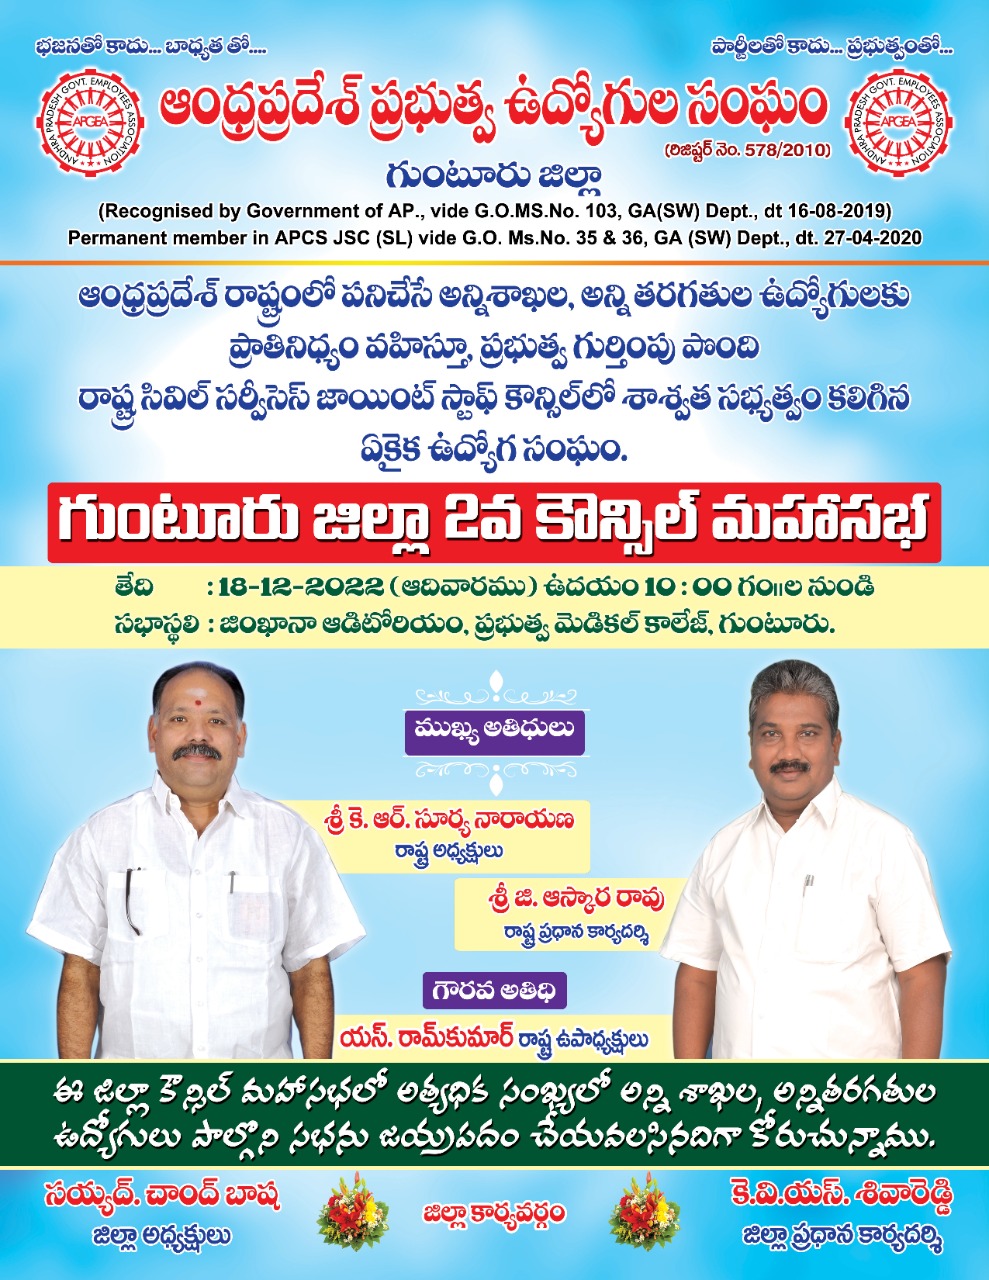 APGEA Guntur District 2nd Council meeting to be held on 18-12-2022